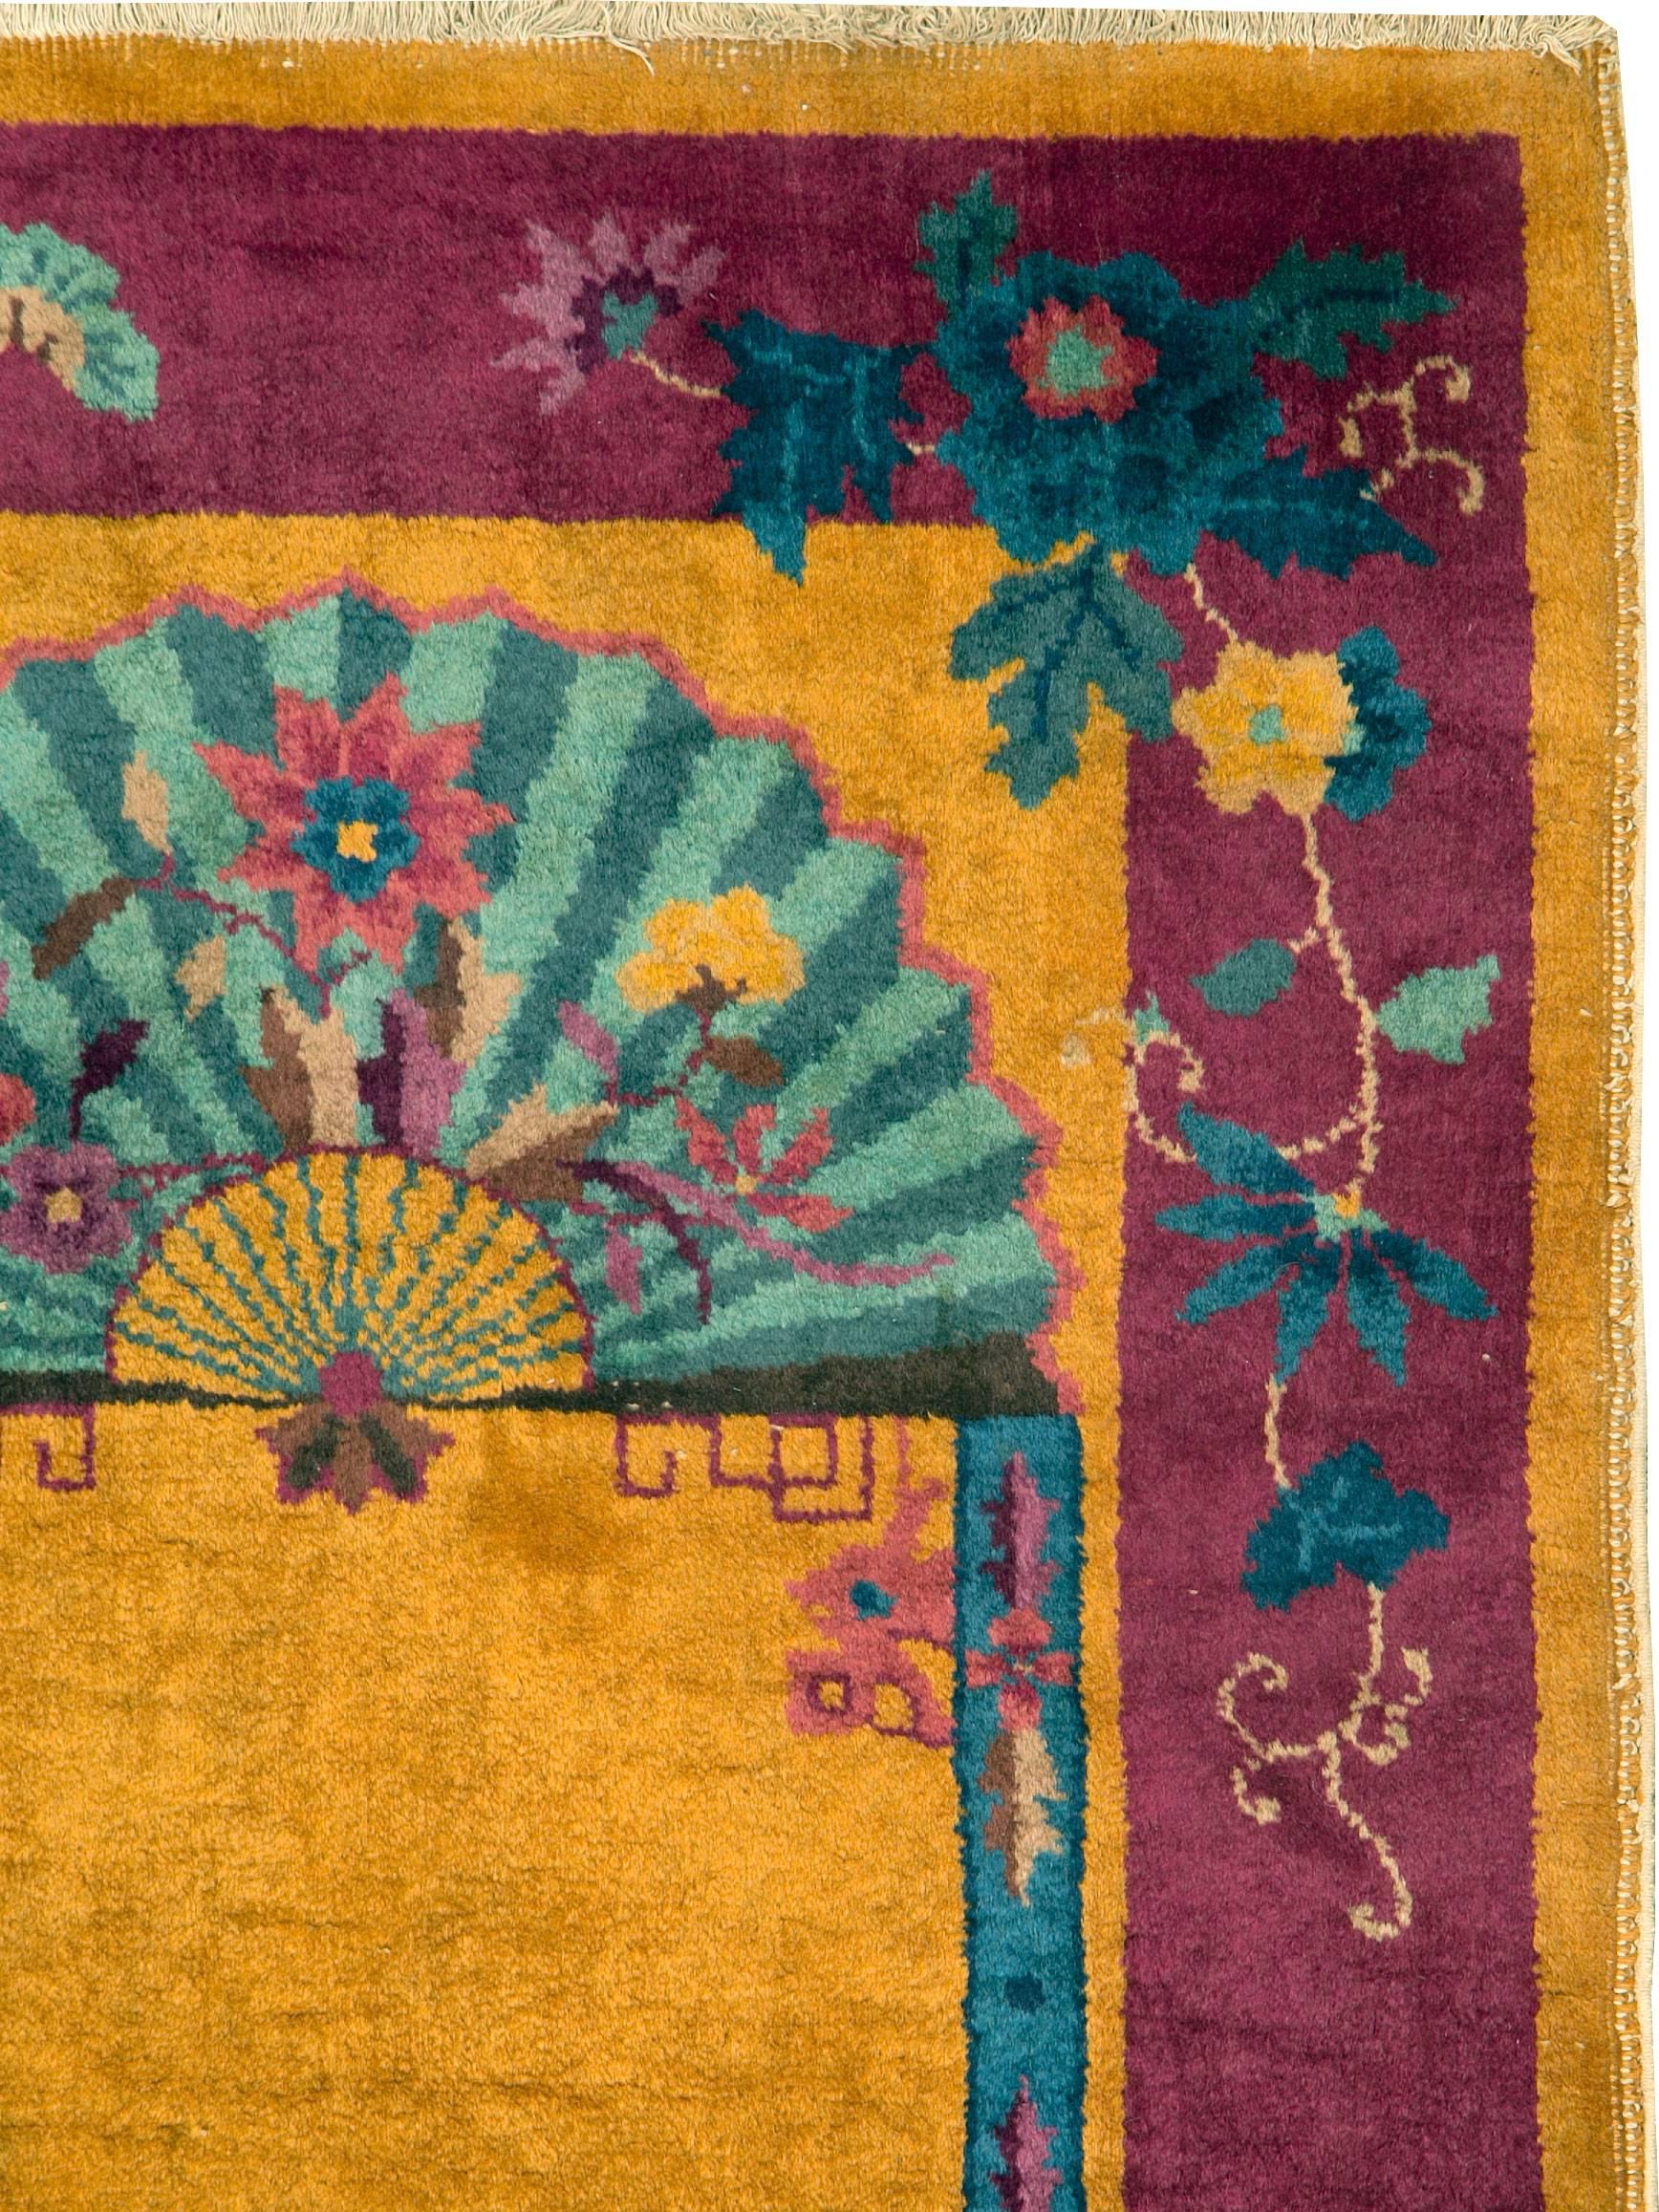 An antique Chinese Deco rug from the early 20th century.